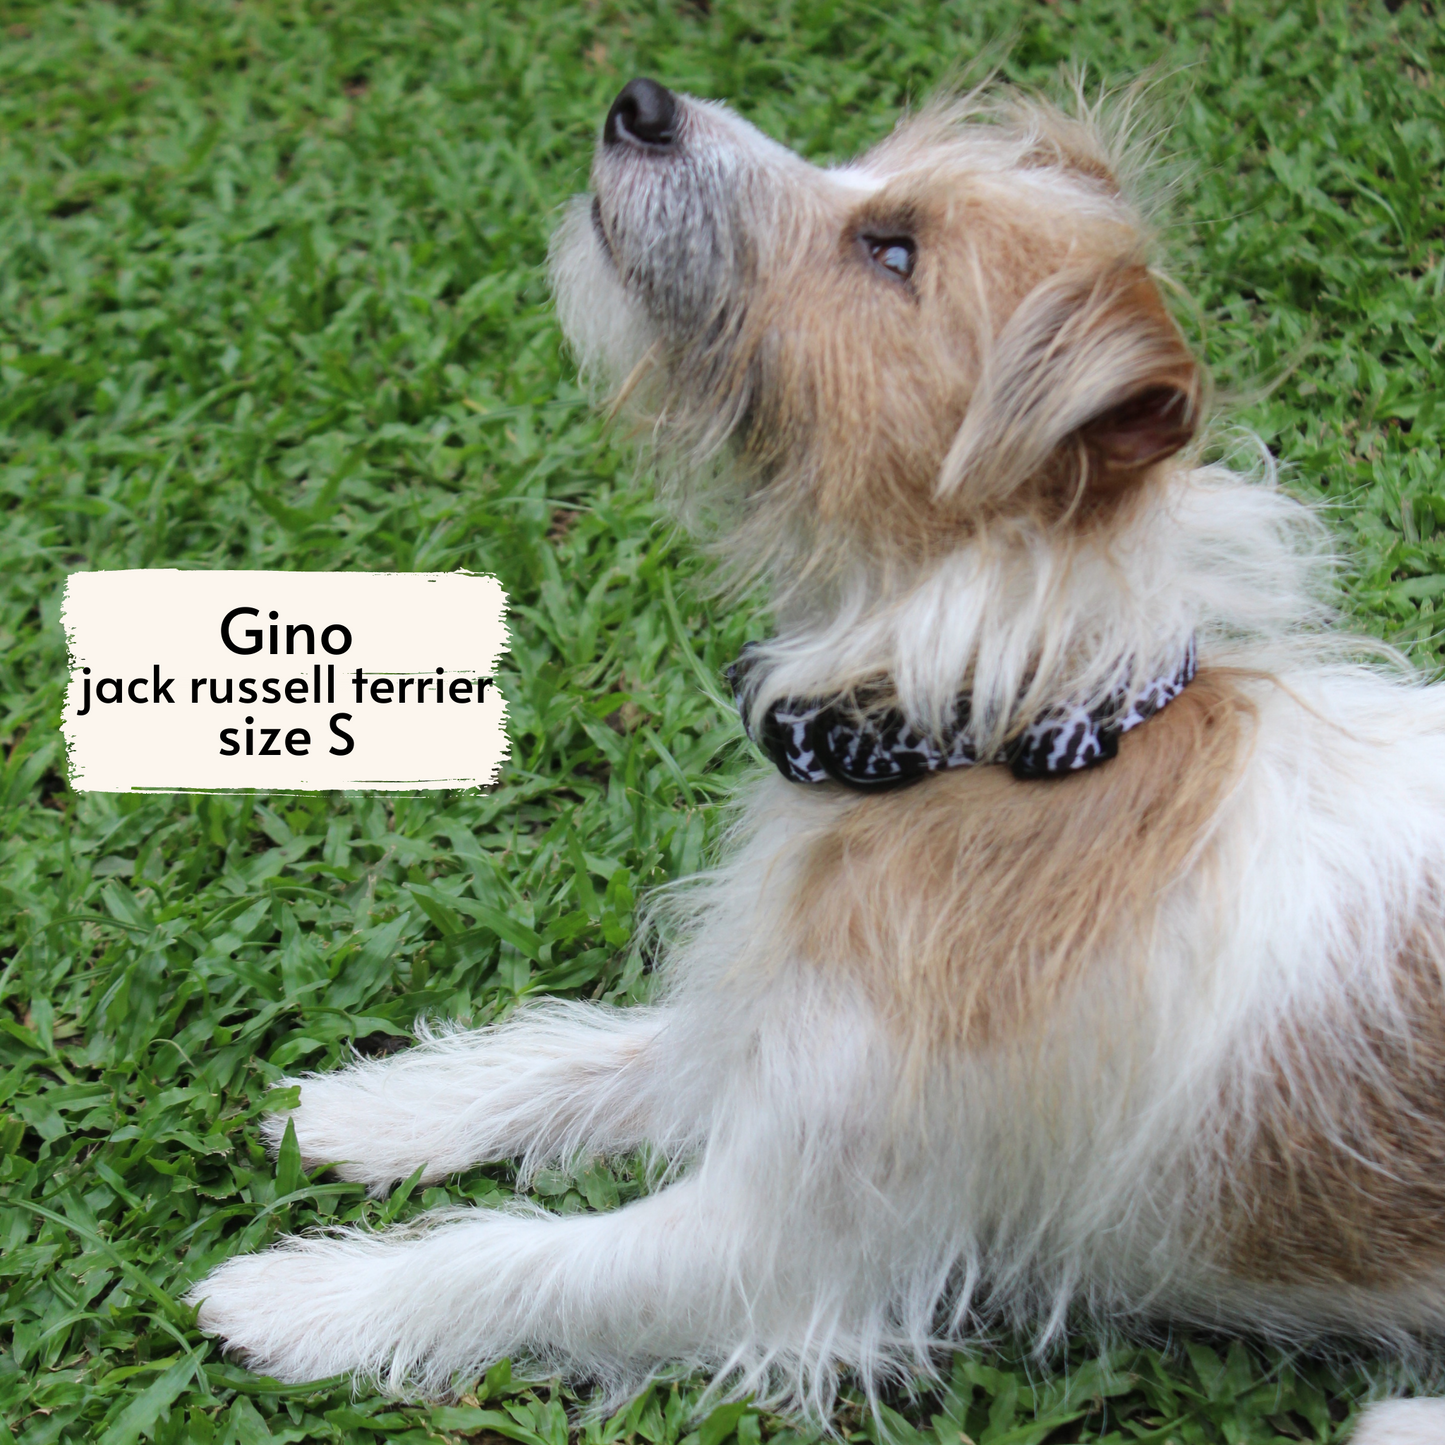 Pata Paw moo collar as seen on a small-sized dog, Gino, a Jack Russell Terrier